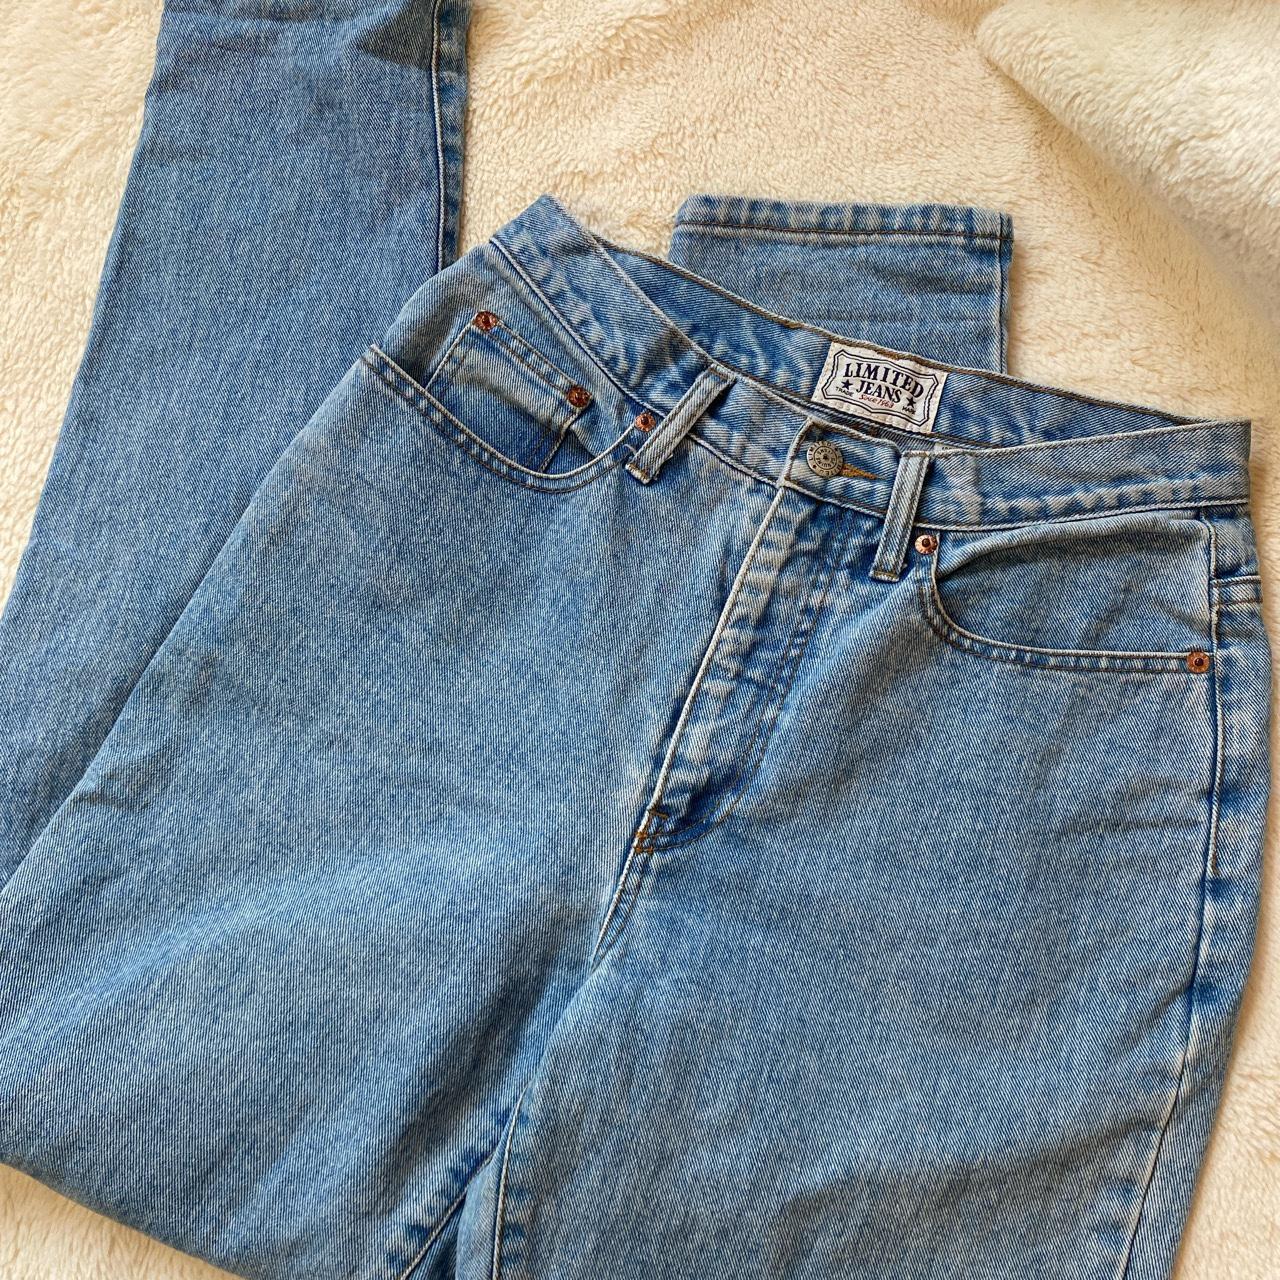 Women's Blue and Navy Jeans